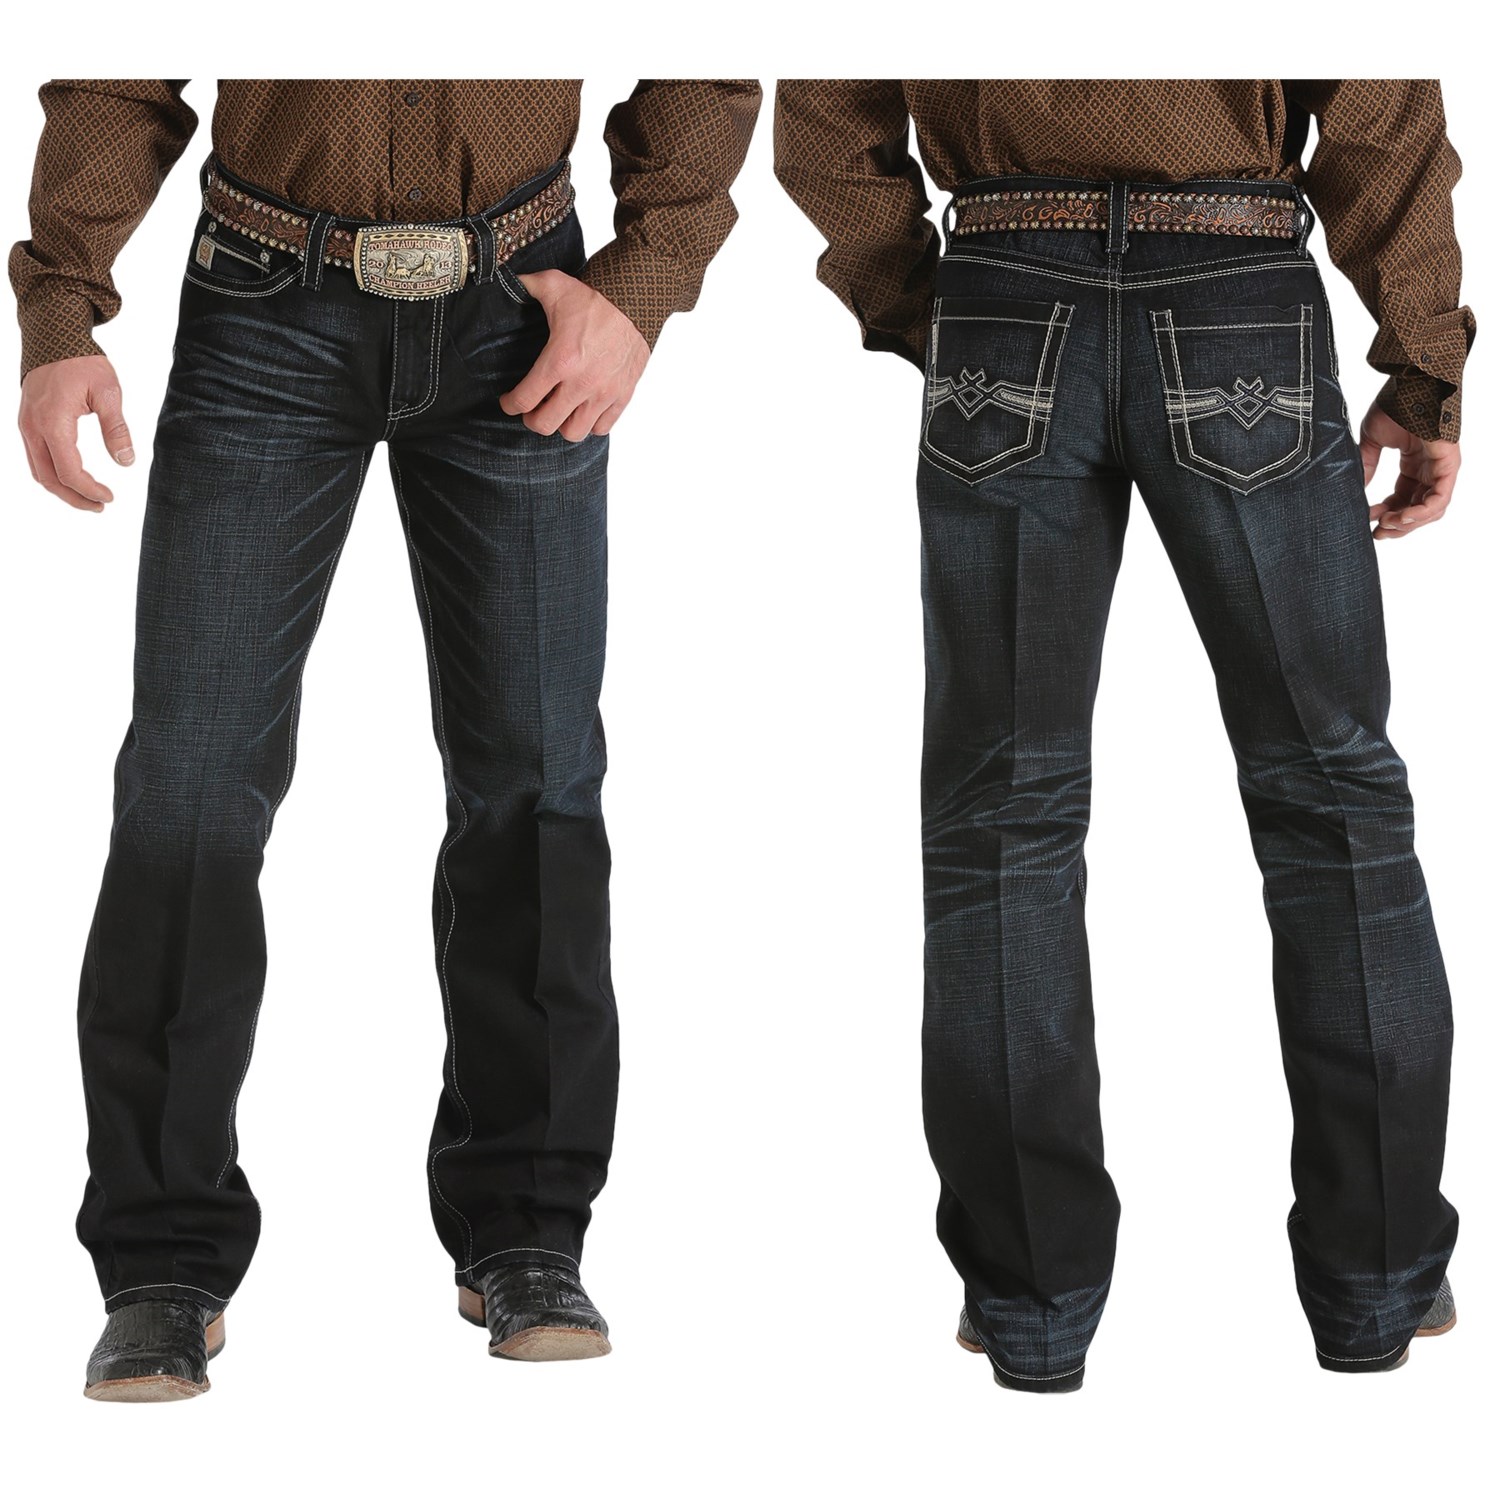 Cinch Grant Mid-Rise Jeans (For Men) 7575A - Save 62%